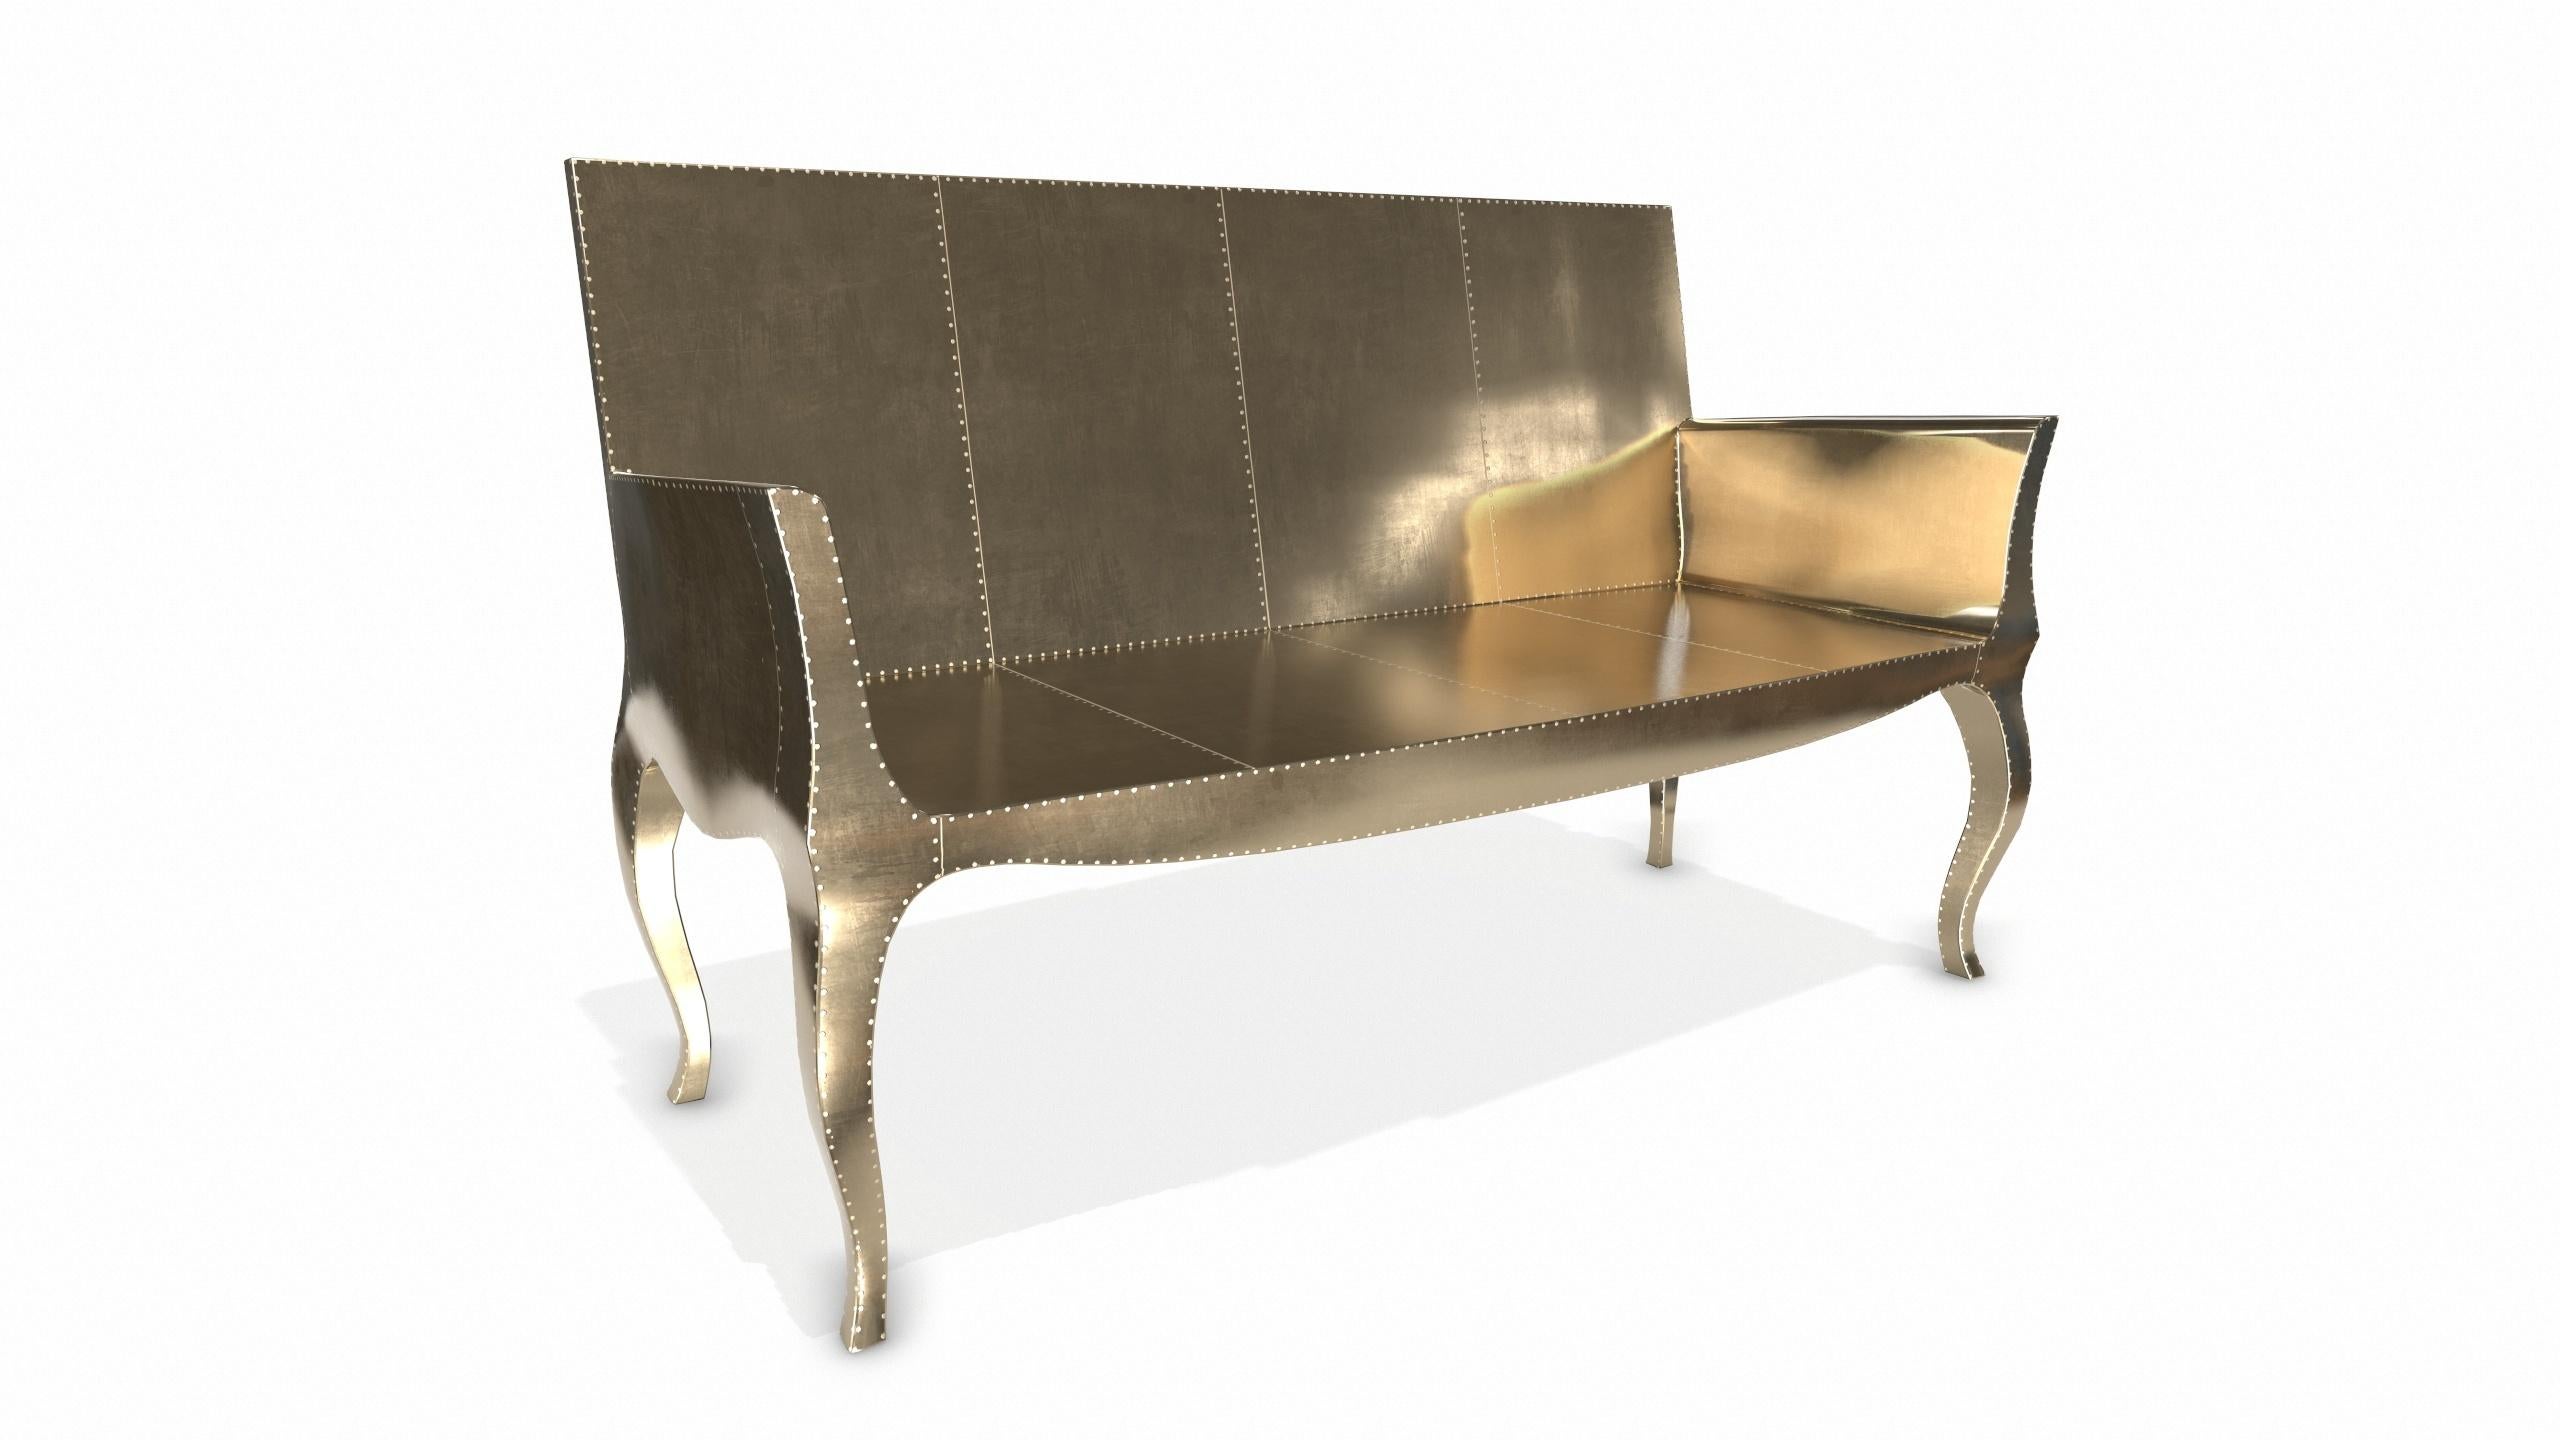 Contemporary Louise Settee Art Deco Chaise Longues in Smooth Brass by Paul Mathieu For Sale